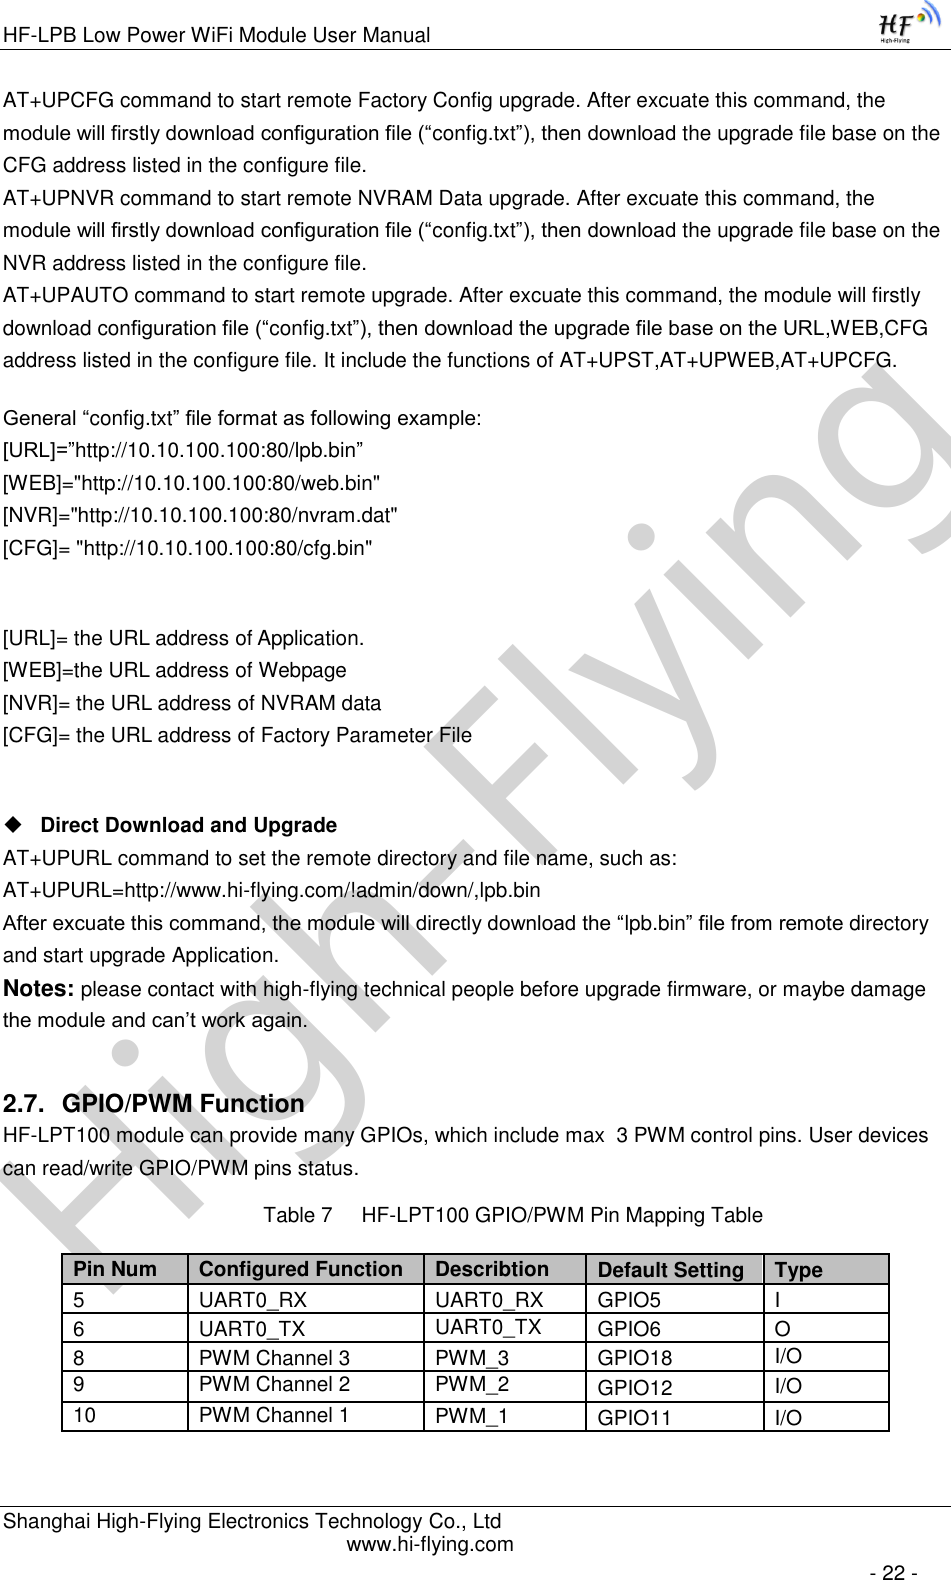 High-FlyingHF-LPB Low Power WiFi Module User Manual Shanghai High-Flying Electronics Technology Co., Ltd www.hi-flying.com   - 22 - AT+UPCFG command to start remote Factory Config upgrade. After excuate this command, the module will firstly download configuration file (“config.txt”), then download the upgrade file base on the CFG address listed in the configure file.  AT+UPNVR command to start remote NVRAM Data upgrade. After excuate this command, the module will firstly download configuration file (“config.txt”), then download the upgrade file base on the NVR address listed in the configure file.  AT+UPAUTO command to start remote upgrade. After excuate this command, the module will firstly download configuration file (“config.txt”), then download the upgrade file base on the URL,WEB,CFG address listed in the configure file. It include the functions of AT+UPST,AT+UPWEB,AT+UPCFG. General “config.txt” file format as following example:                                                                                                                                               [URL]=”http://10.10.100.100:80/lpb.bin” [WEB]=&quot;http://10.10.100.100:80/web.bin&quot; [NVR]=&quot;http://10.10.100.100:80/nvram.dat&quot; [CFG]= &quot;http://10.10.100.100:80/cfg.bin&quot;  [URL]= the URL address of Application. [WEB]=the URL address of Webpage [NVR]= the URL address of NVRAM data [CFG]= the URL address of Factory Parameter File   Direct Download and Upgrade AT+UPURL command to set the remote directory and file name, such as: AT+UPURL=http://www.hi-flying.com/!admin/down/,lpb.bin After excuate this command, the module will directly download the “lpb.bin” file from remote directory and start upgrade Application. Notes: please contact with high-flying technical people before upgrade firmware, or maybe damage the module and can’t work again. 2.7. GPIO/PWM Function HF-LPT100 module can provide many GPIOs, which include max  3 PWM control pins. User devices can read/write GPIO/PWM pins status. Table 7     HF-LPT100 GPIO/PWM Pin Mapping Table       Pin Num Configured Function Describtion Default Setting Type 5 UART0_RX UART0_RX GPIO5 I 6 UART0_TX UART0_TX GPIO6 O 8 PWM Channel 3 PWM_3 GPIO18 I/O 9 PWM Channel 2 PWM_2 GPIO12 I/O 10 PWM Channel 1 PWM_1 GPIO11 I/O 